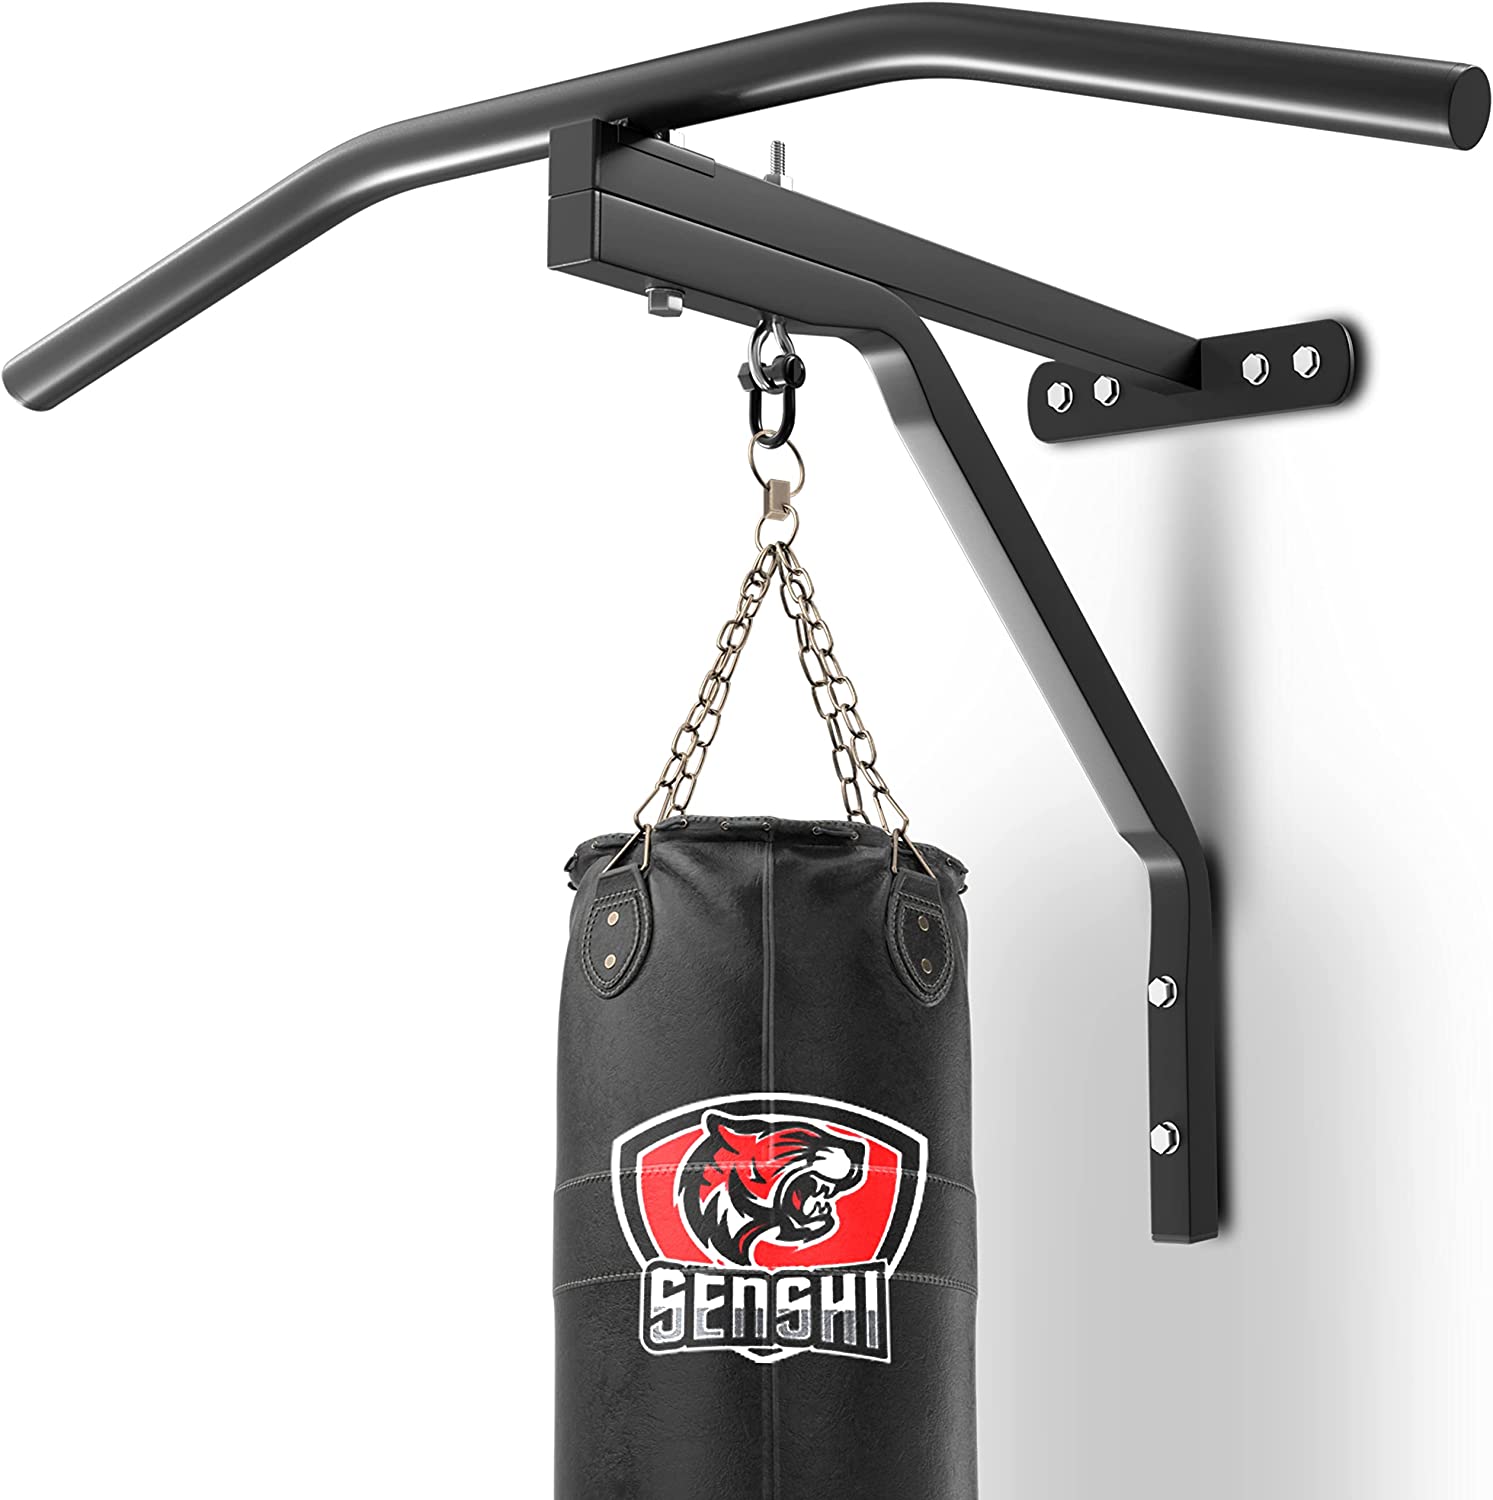 Punch Bag Wall Mount Bracket With Pull Up Bar